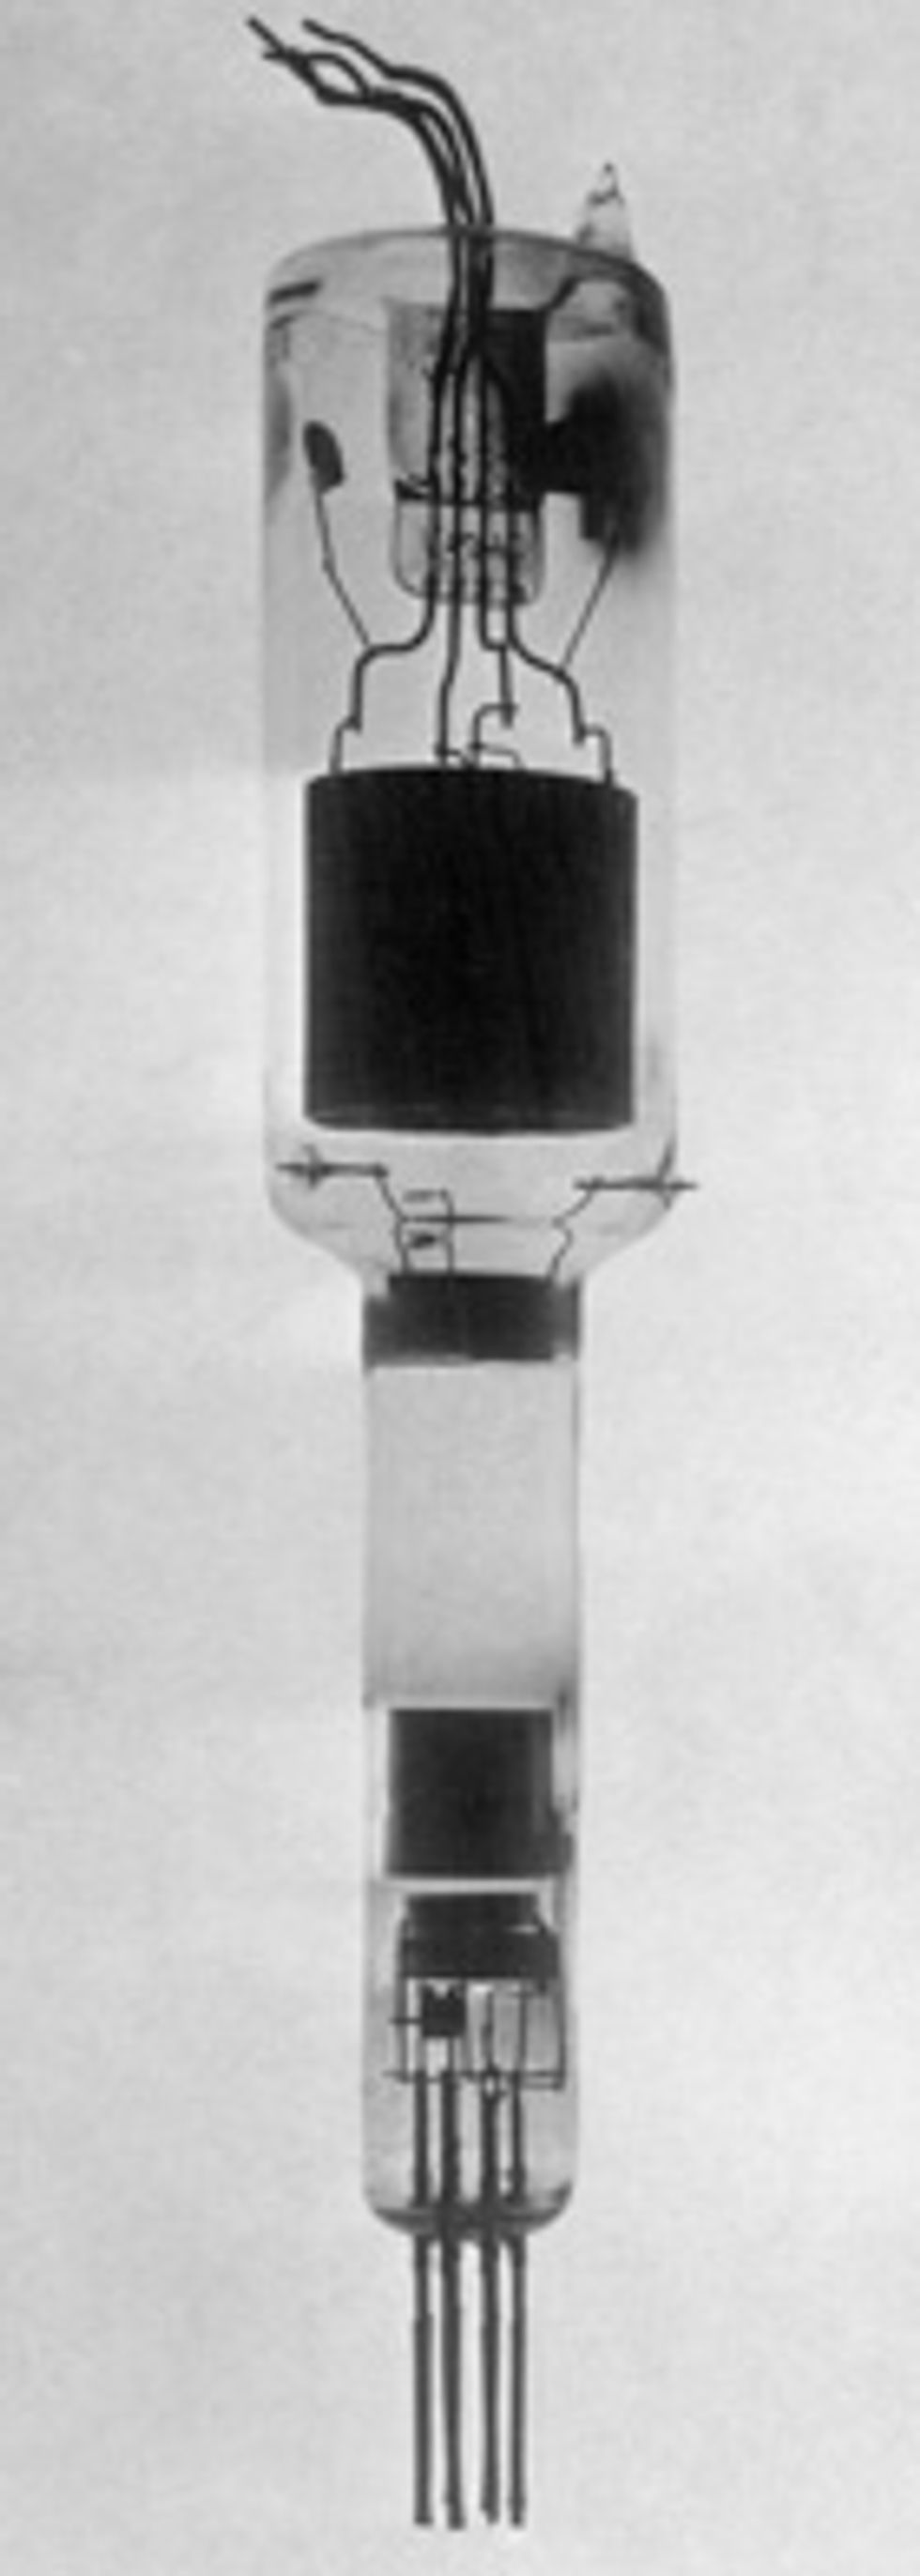 A glass tube with a wide top and narrow bottom containing metal electrodes and cylindrical plates.